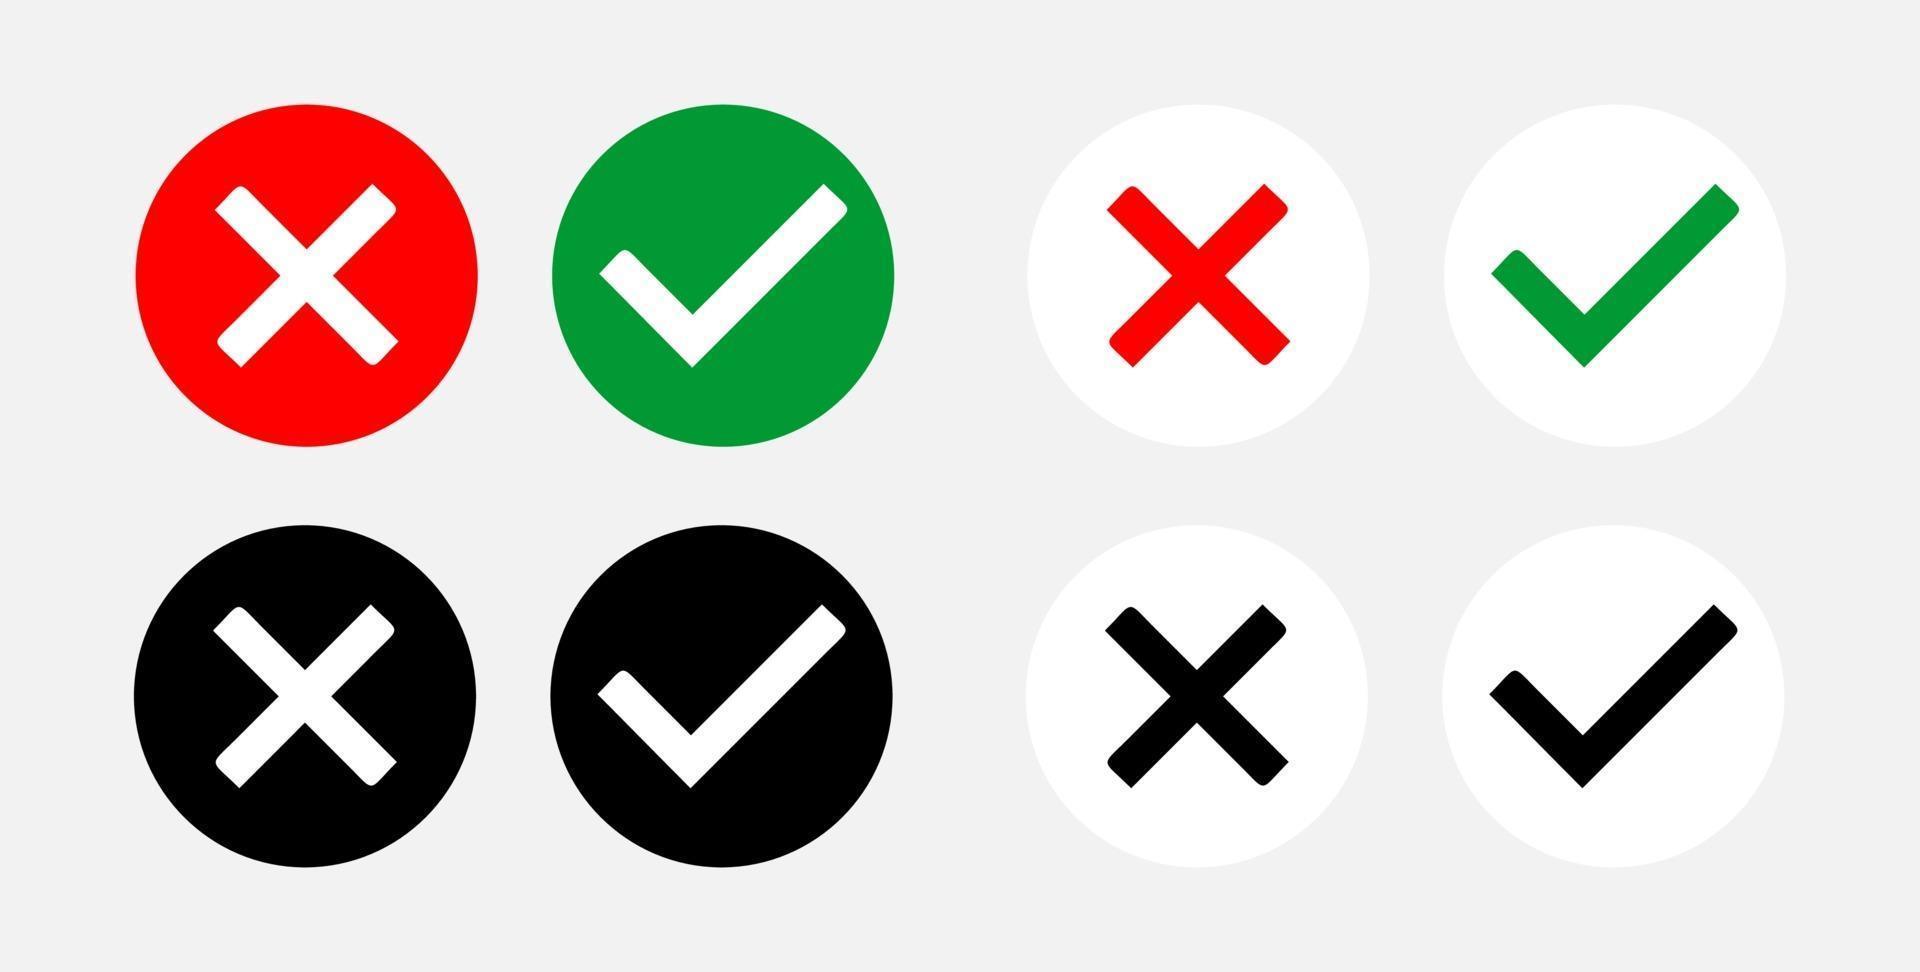 Set of Yes and No or Right and Wrong or Approved and Rejected Icons with Check Mark and Cross Symbols. Vector Image.